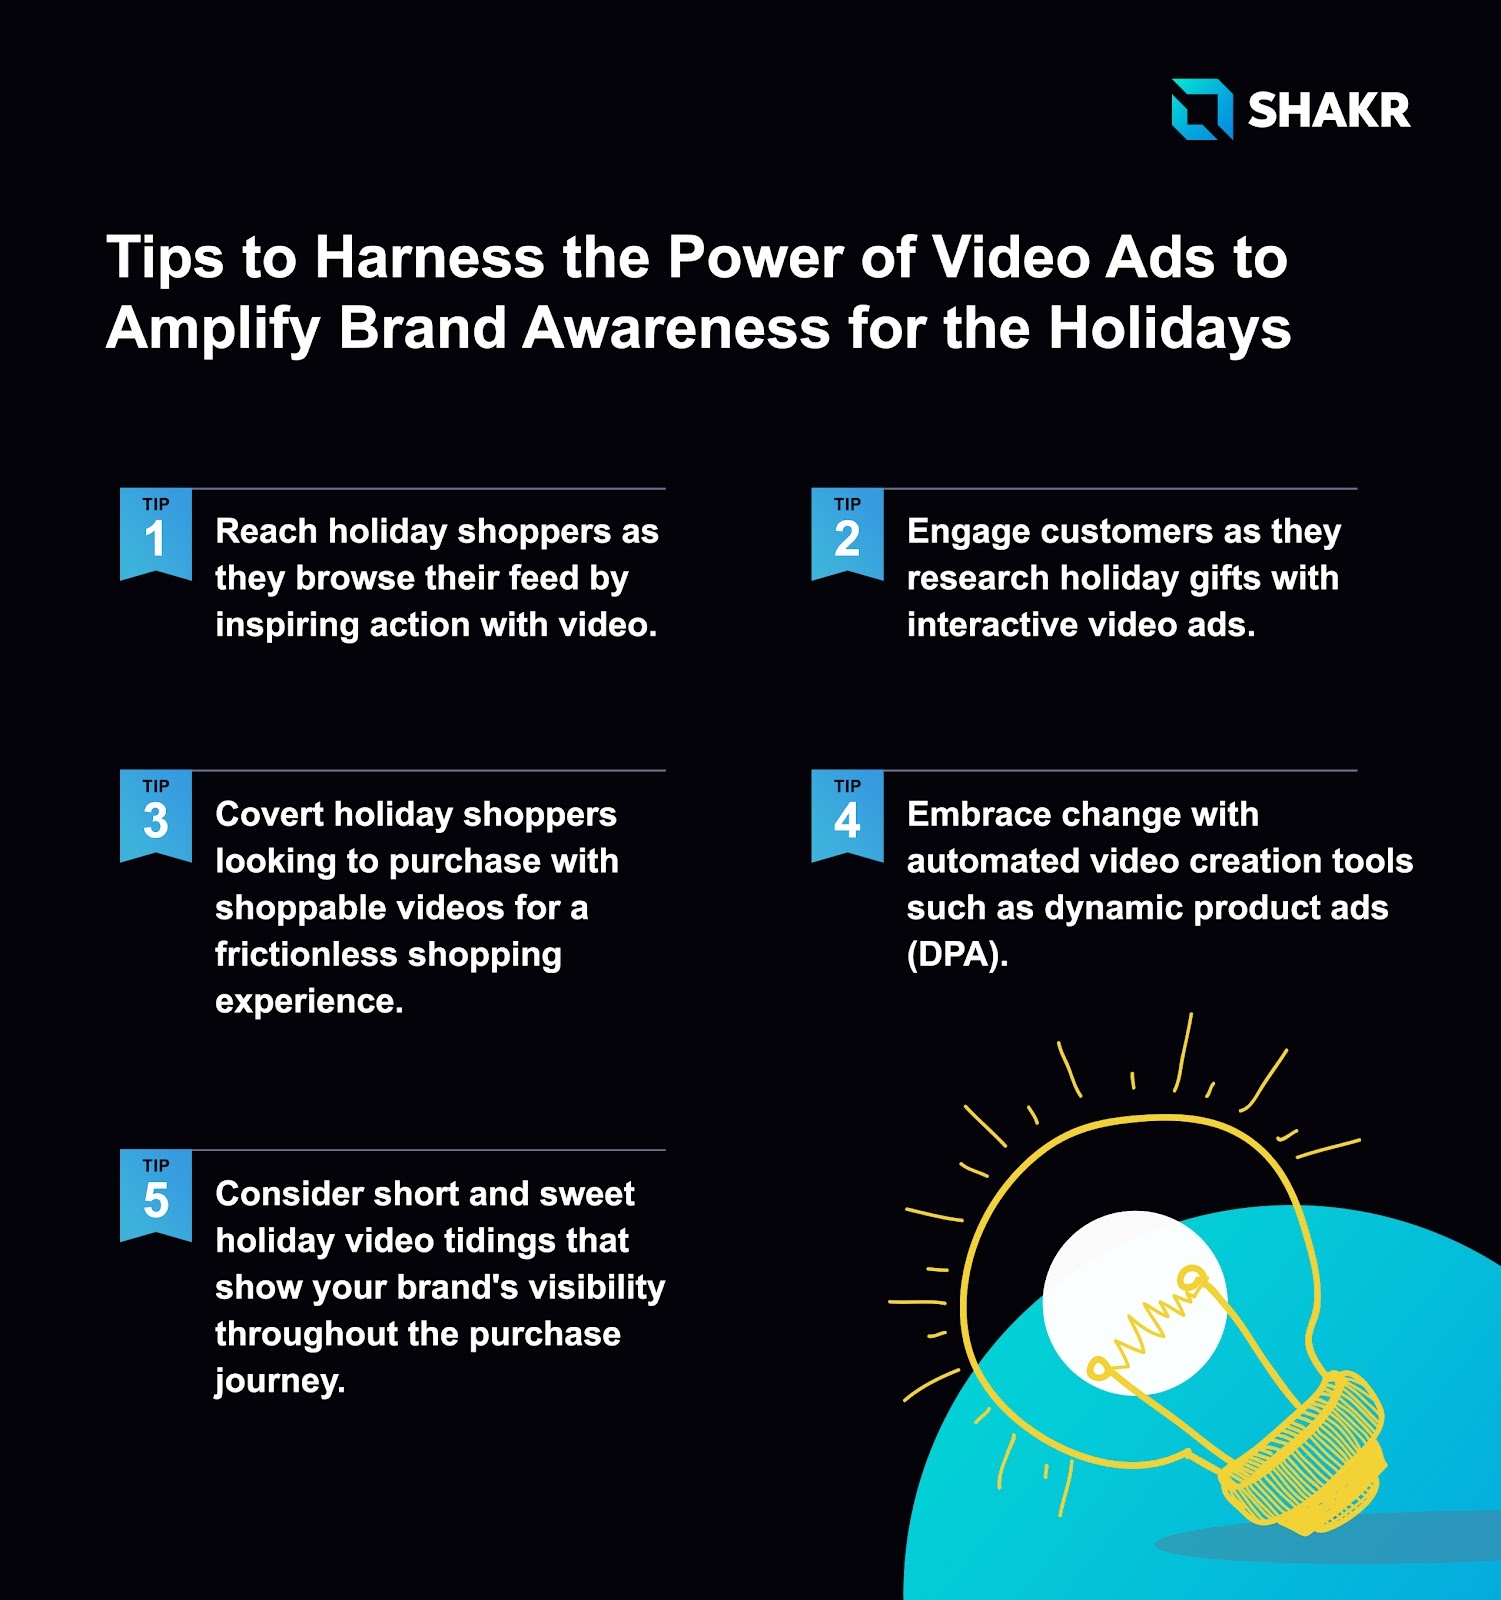 Stand Out for the Holidays with Video: Tips to Ramp Up 2021 Holiday Brand Awareness